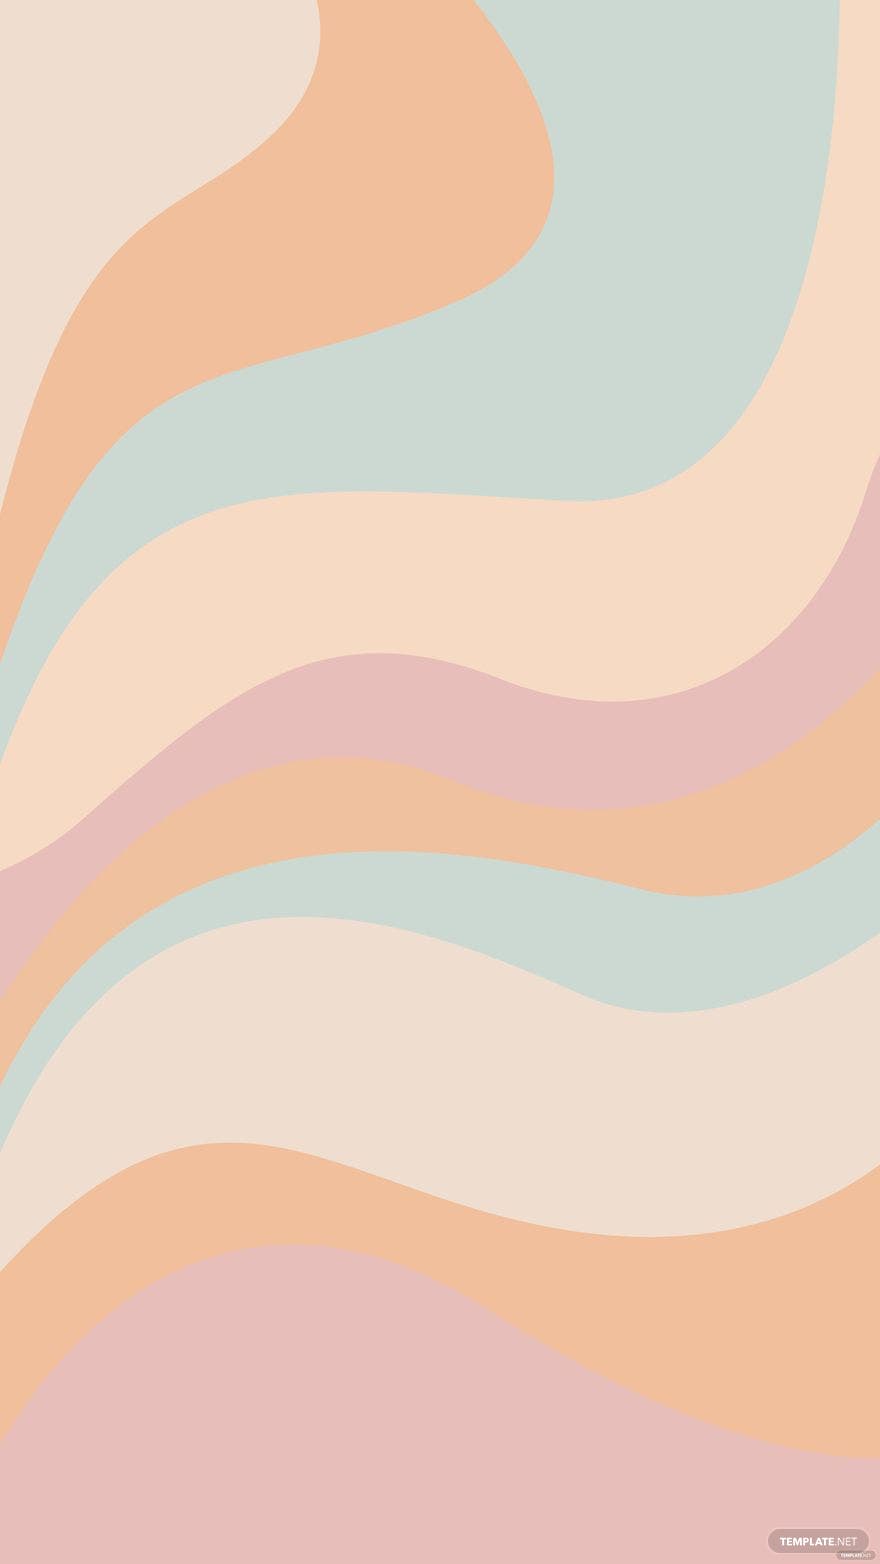 A colorful abstract pattern with pink, orange and blue - Pastel